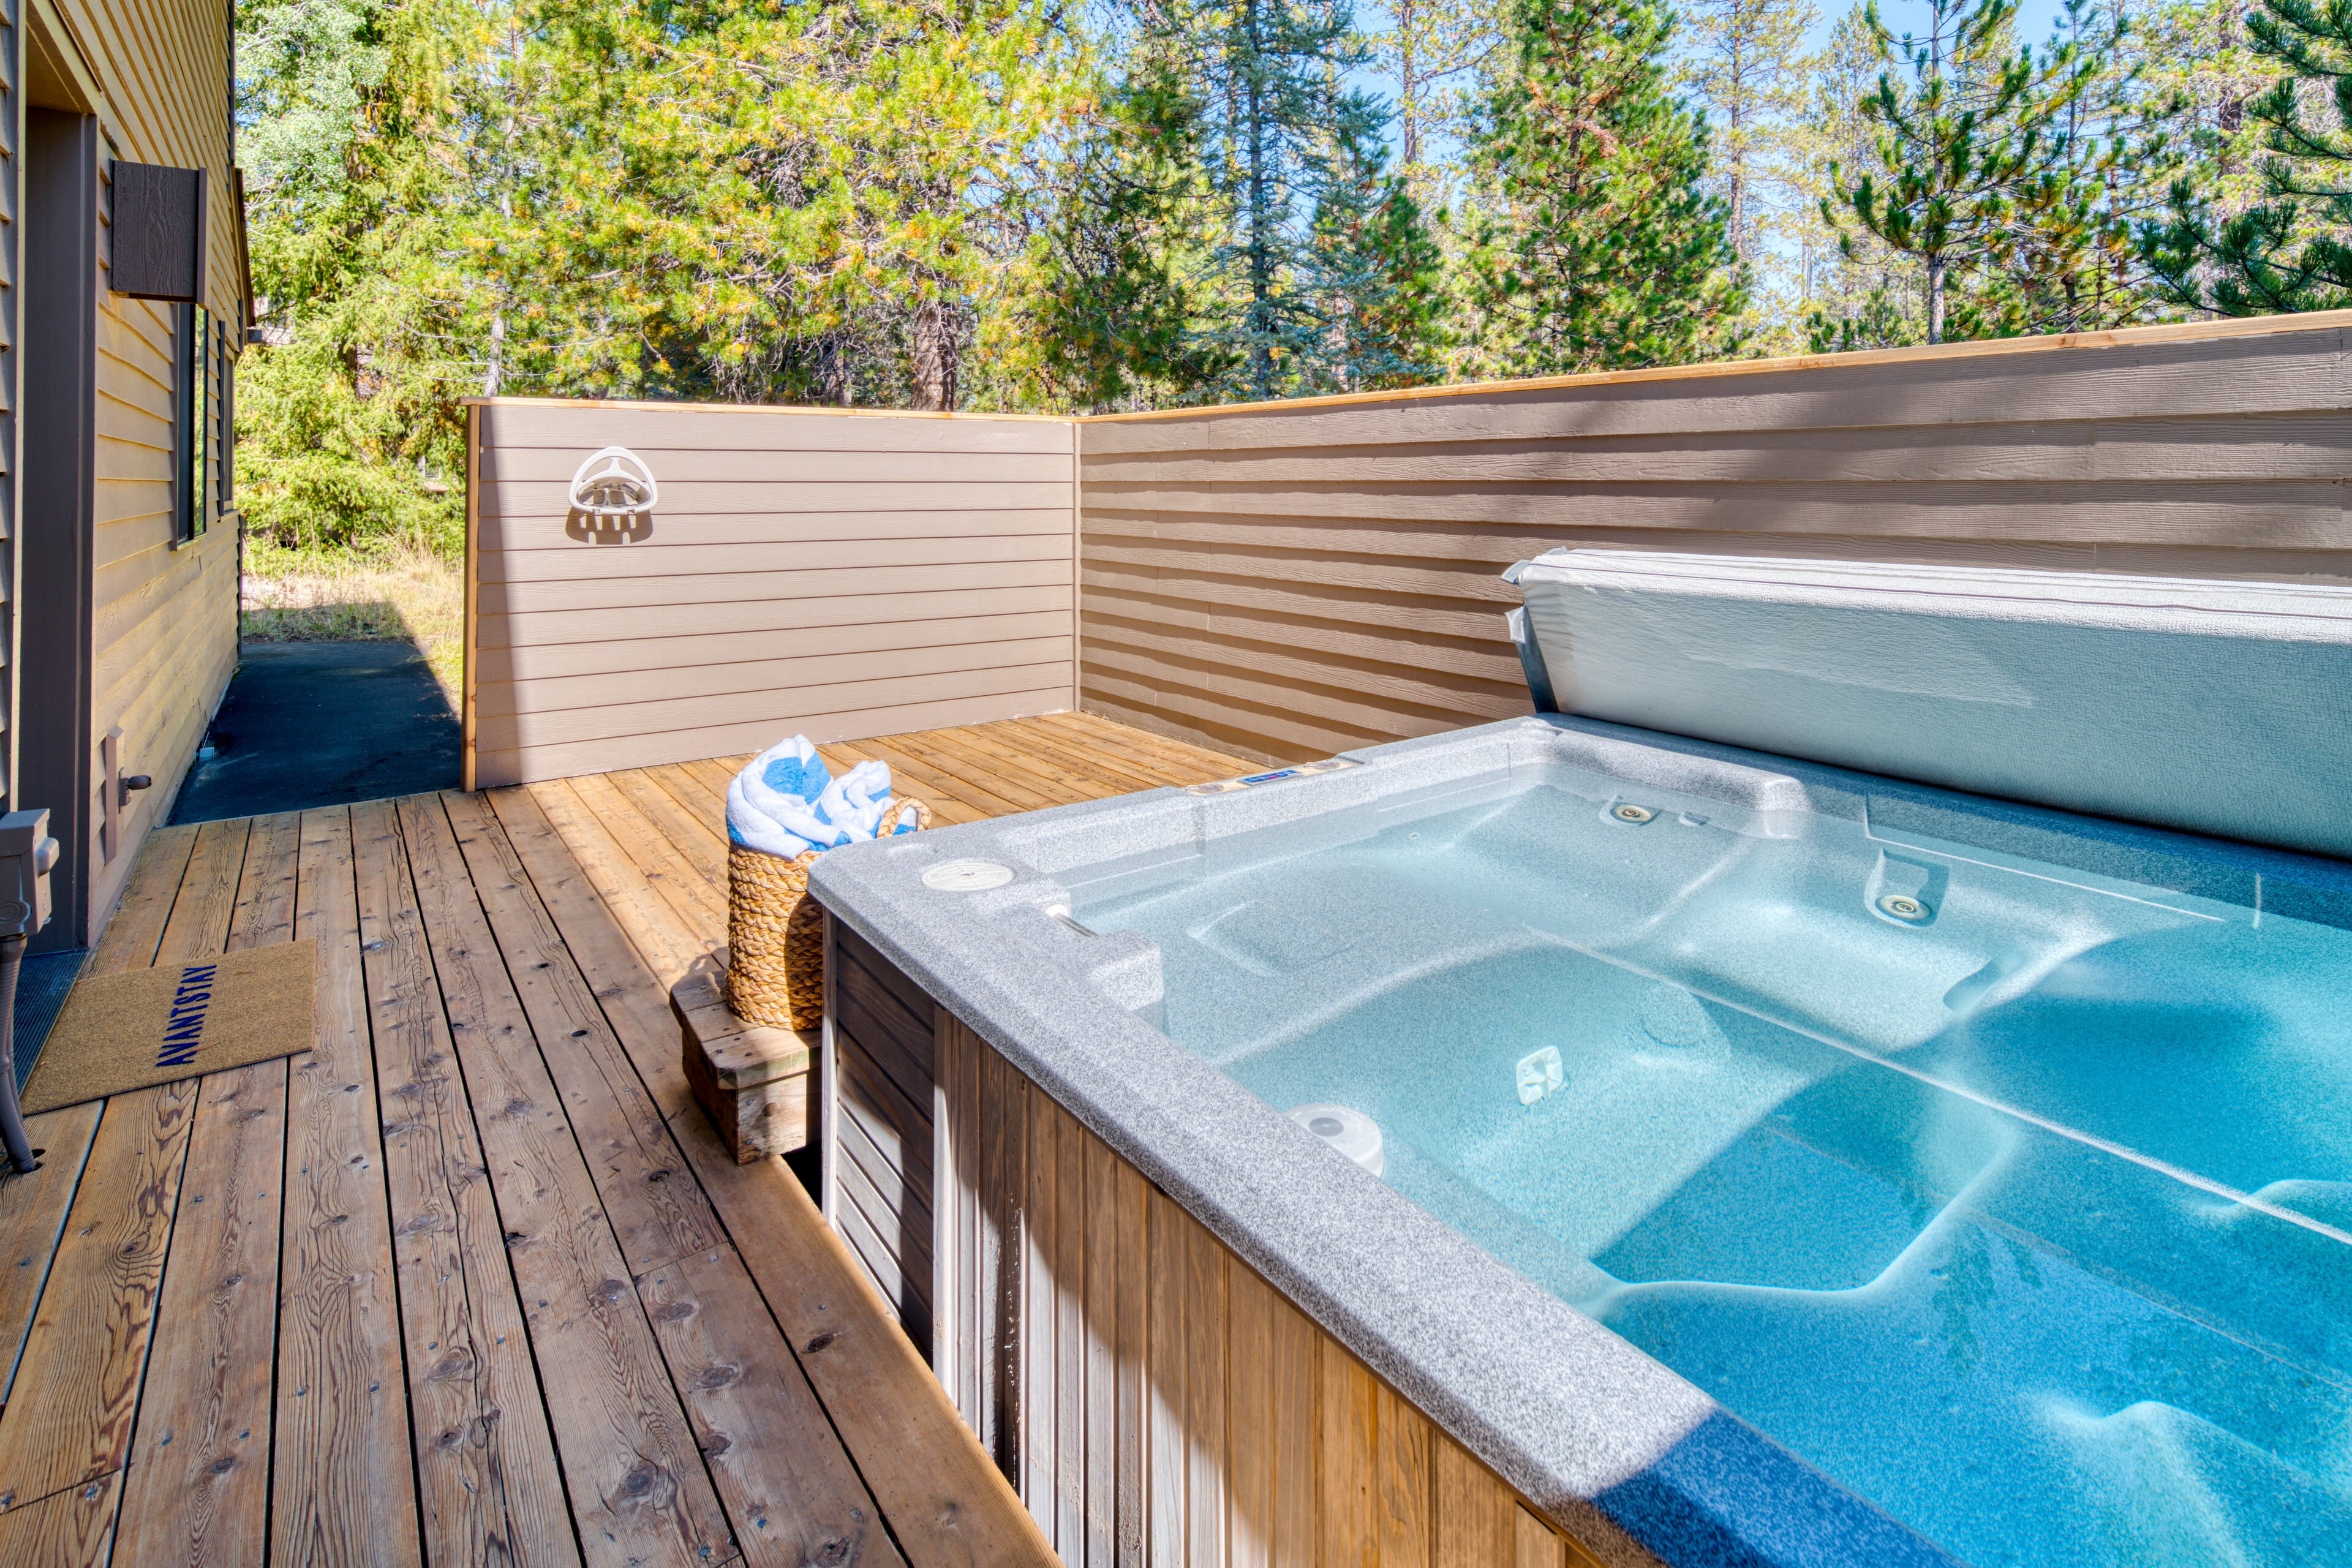 Large hot tub on the deck.